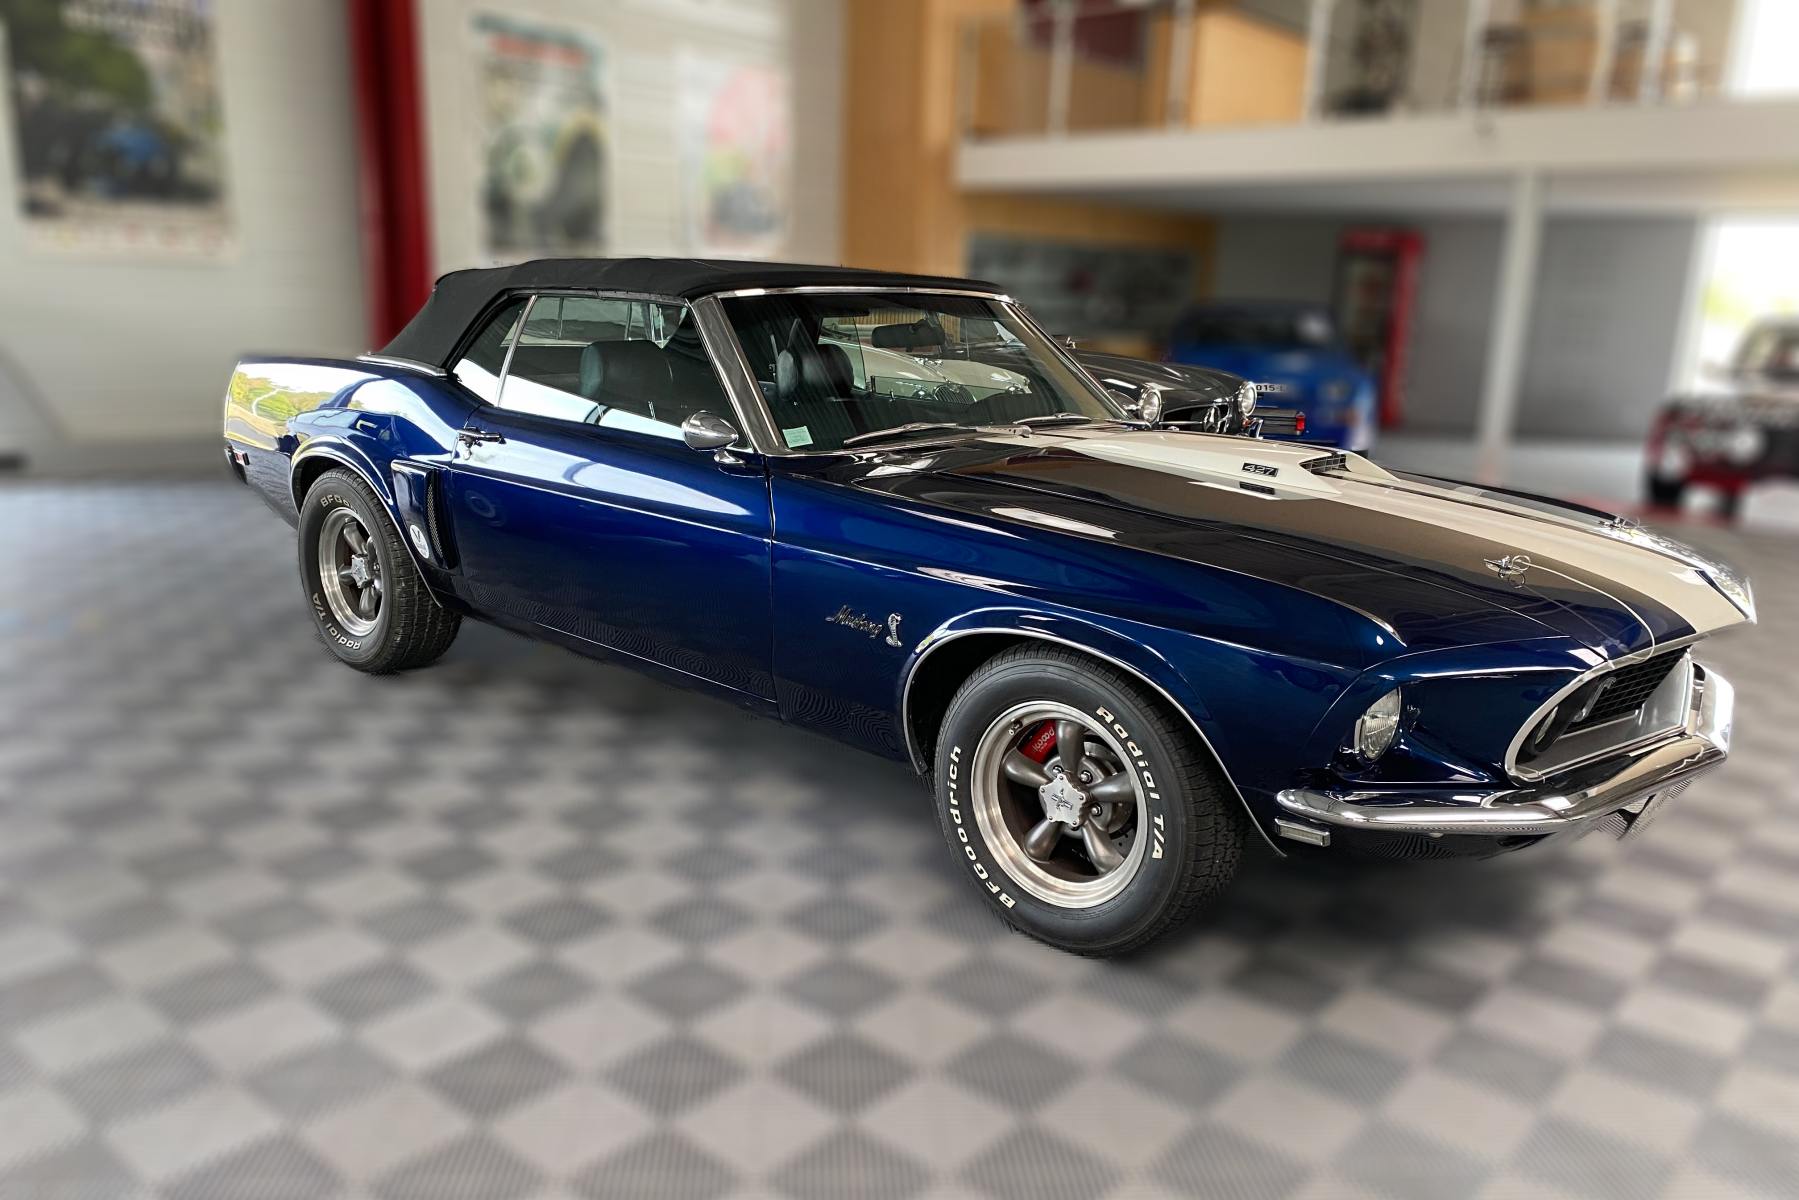 Vente-annonce-Ford-Mustang 351 GT V8 Cabriolet-classic-auto-restor